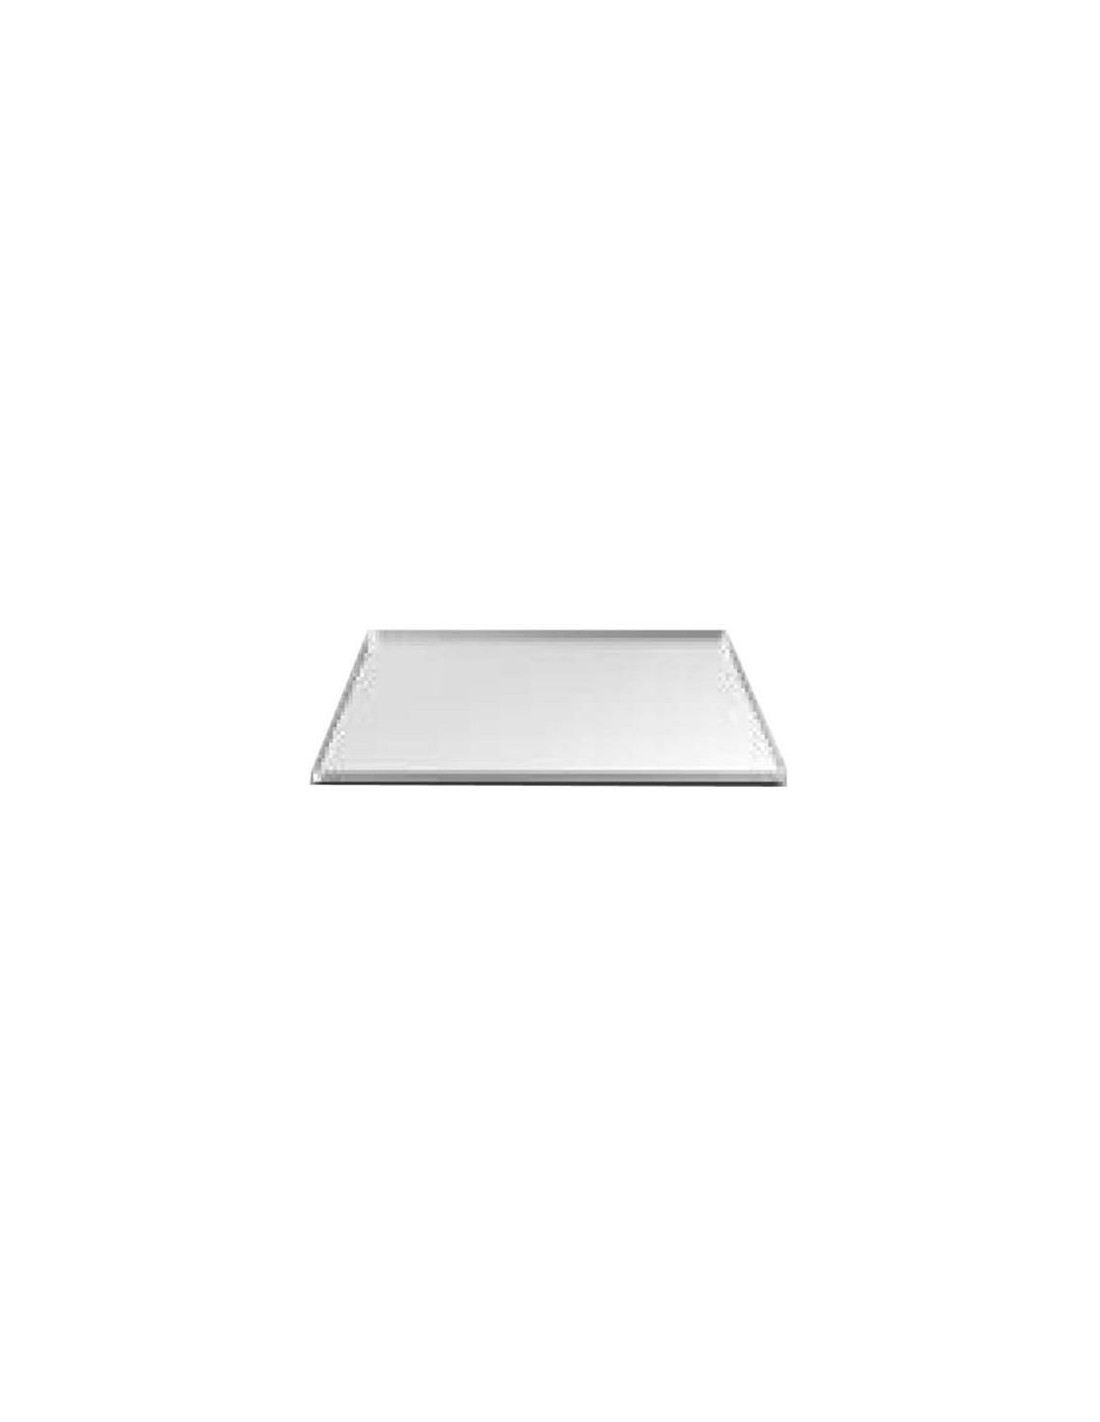 Stainless steel pastry tray - Dimensions 60x40x1.2h cm